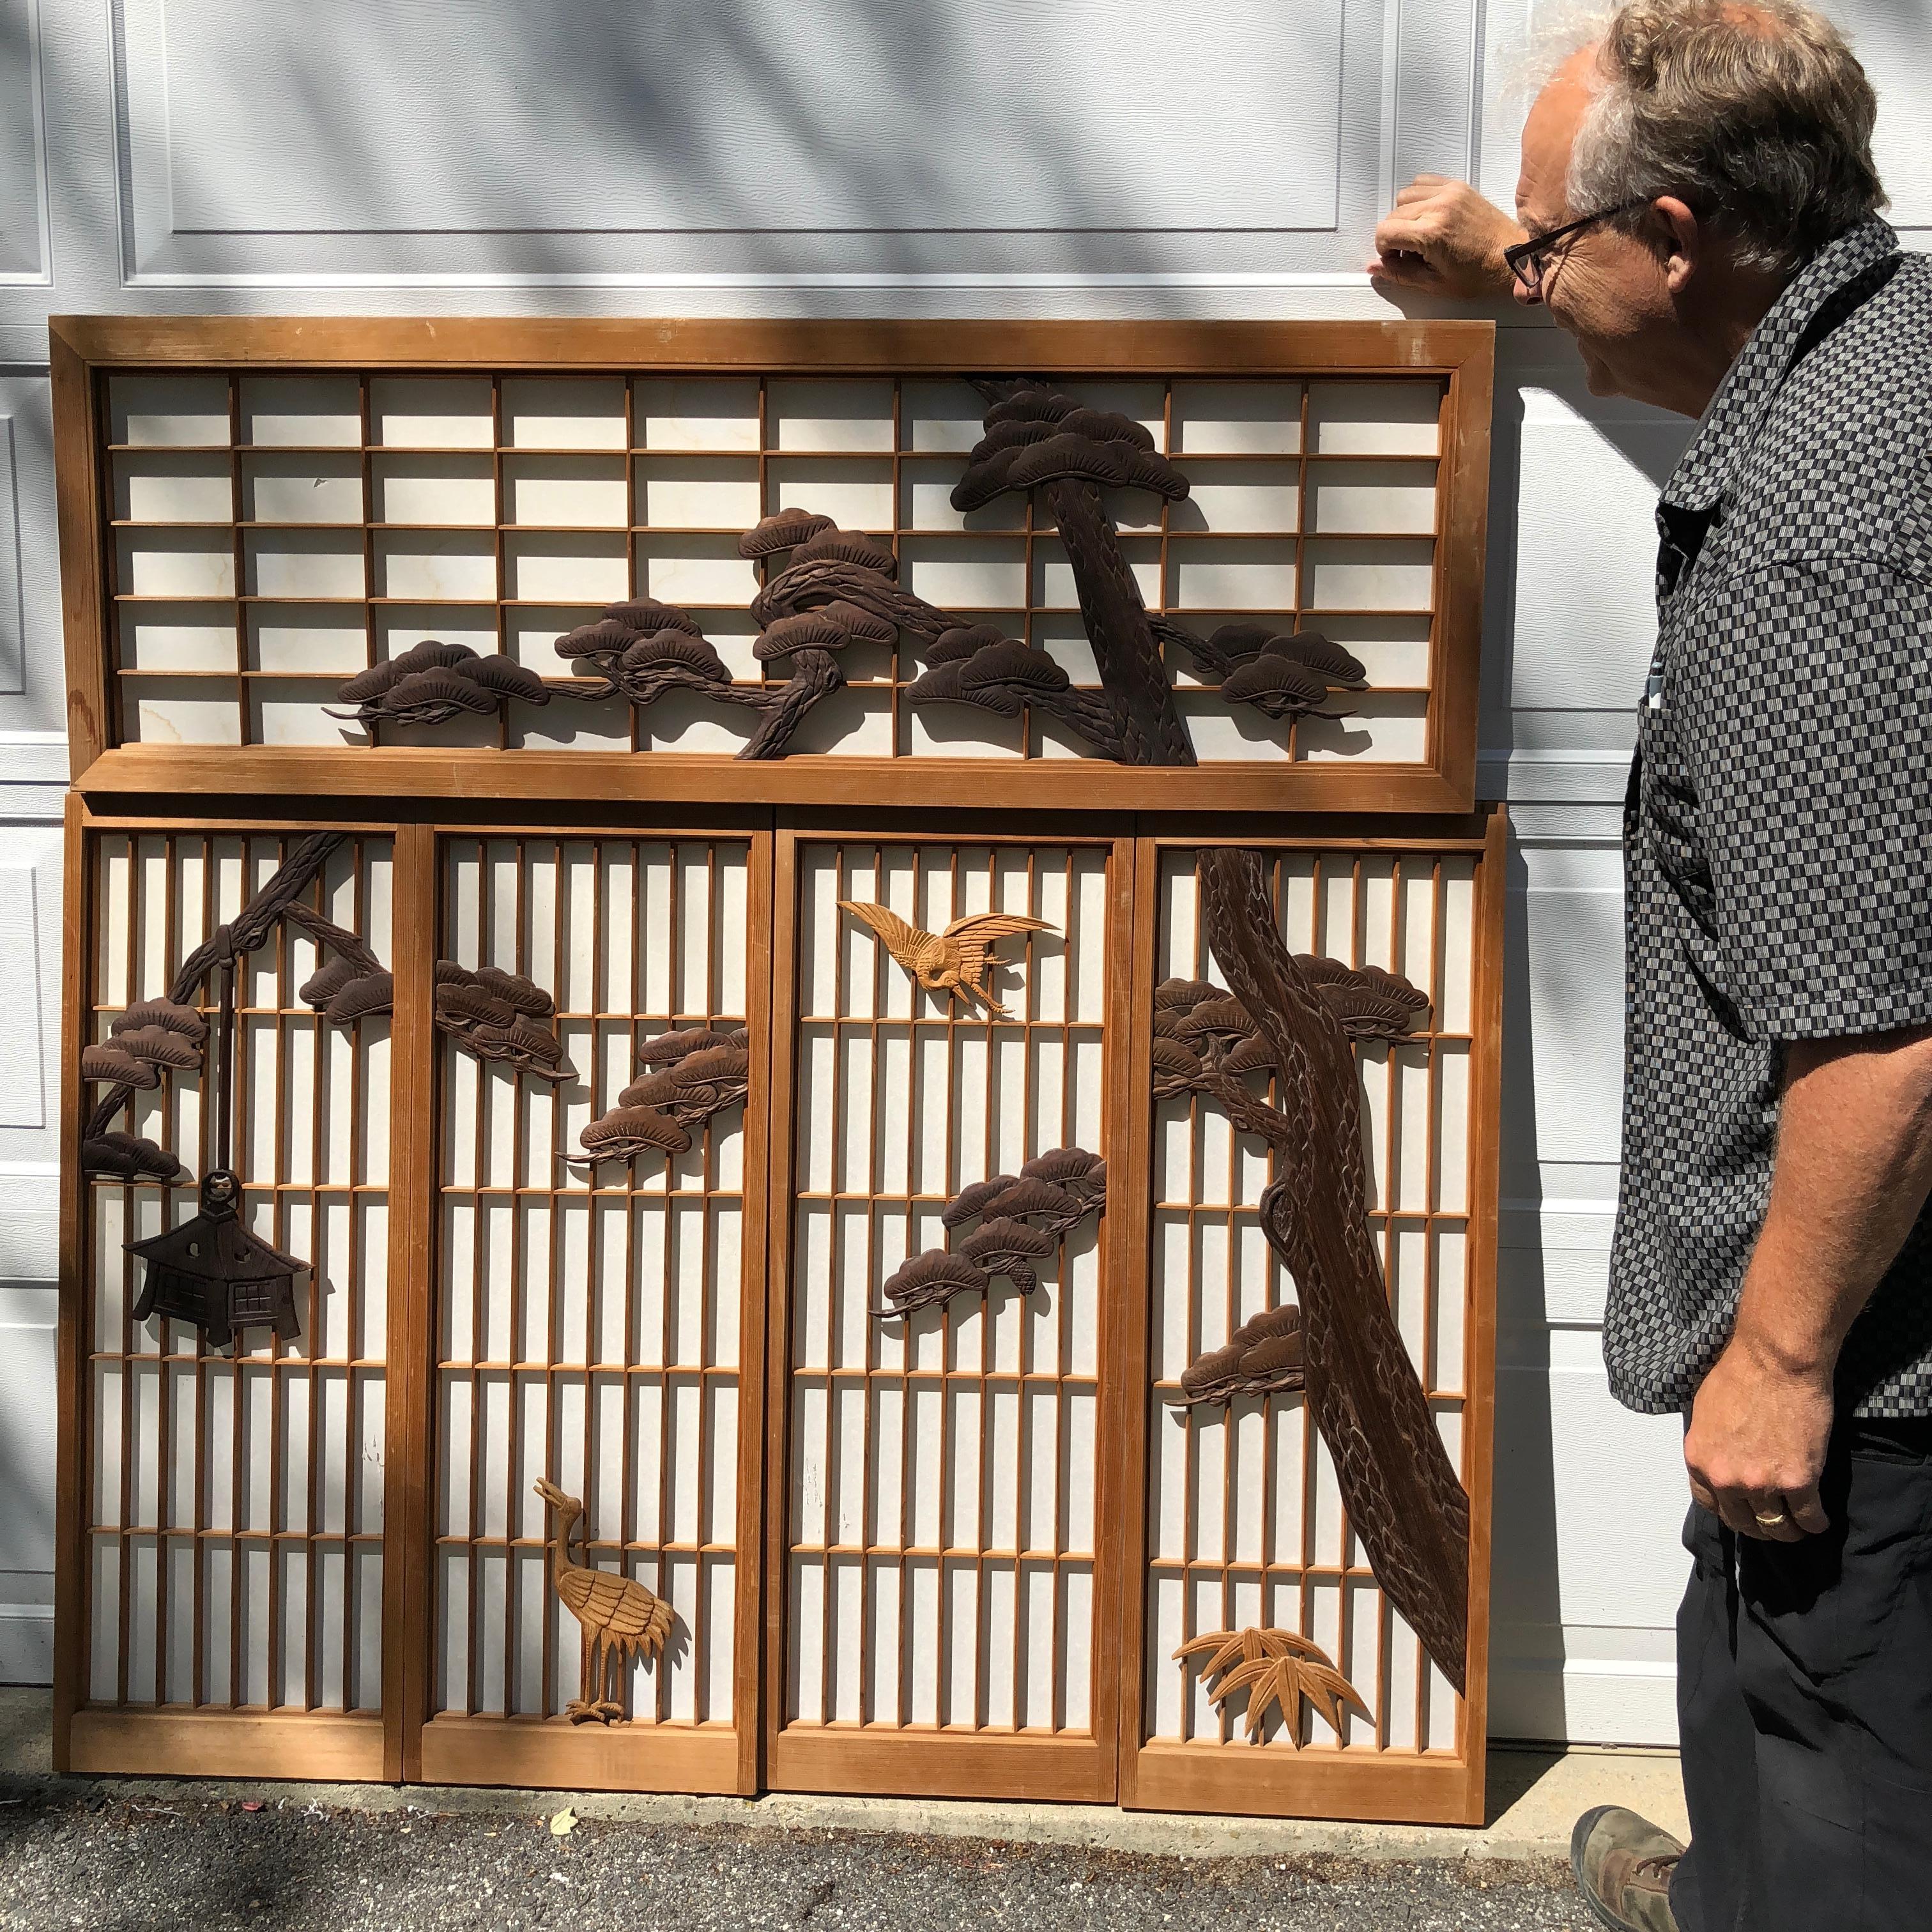 Japan, a fine hand-carved wooden Shoji screen set of five (5) panels featuring a stunning black pine tree, birds, and lantern, all hand-carved wooden designs. A shoji is a wall decoration, door, window or room divider consisting of translucent paper